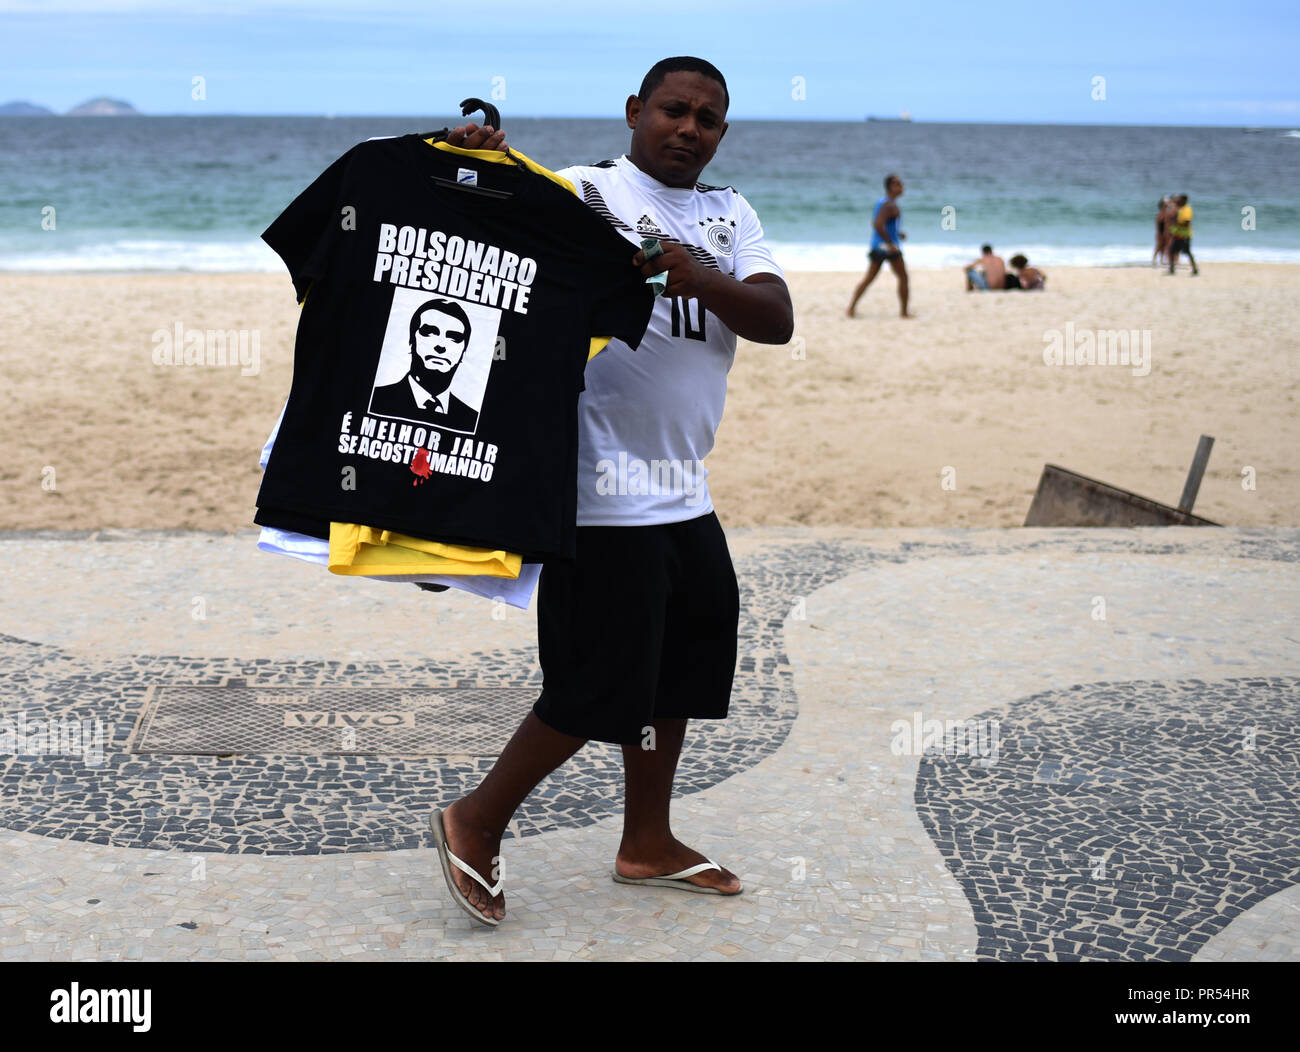 Rio de Janeiro, Brazil. 29th Sep, 2018. A man sells T-shirts at Copacabana beach to support right-wing presidential candidate Bolsonaro. This Saturday, rallies against the ex-military are also expected. Bolsonaro is the favourite in the presidential election on 7 October, since a court banned the candidacy of detained ex-president Lula da Silva. Brazil's 'trump card' has been involved in politics for a long time, but has recently presented itself as an anti-system candidate. Credit: Fabio Teixeira/dpa/Alamy Live News Stock Photo